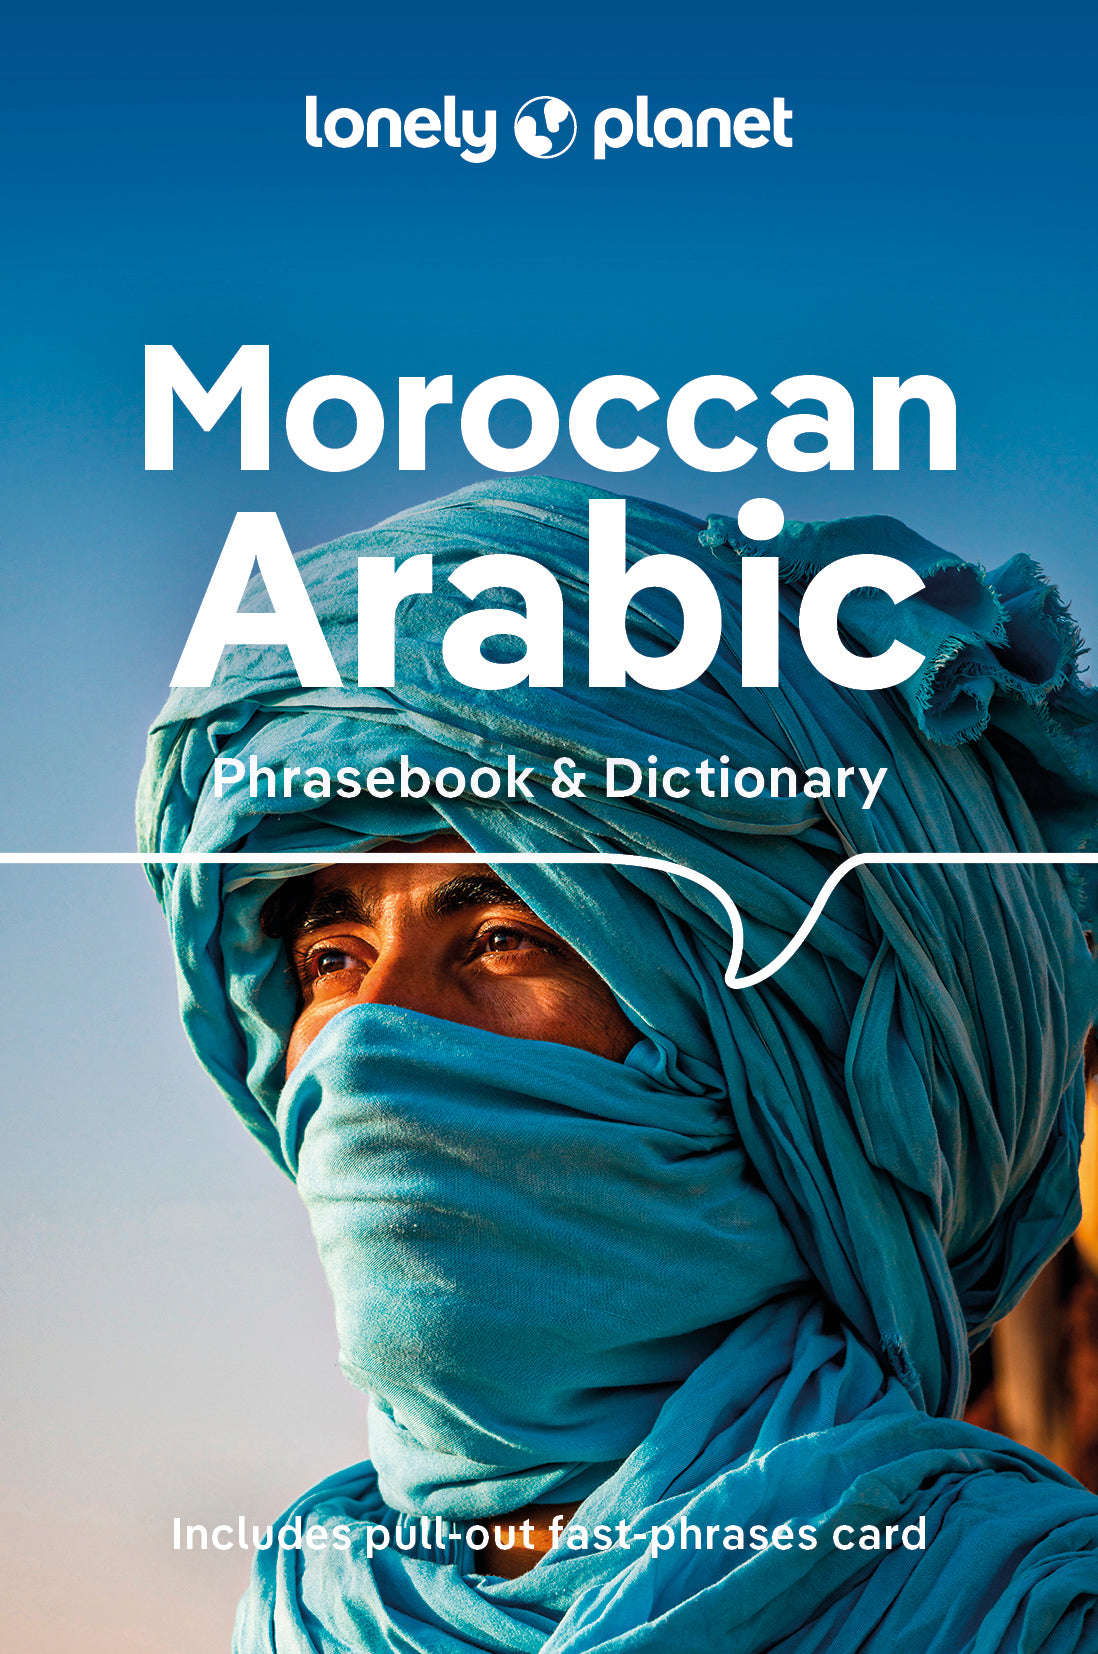 Lonely Planet's Moroccan Arabic Phrasebook and Dictionary and eBook